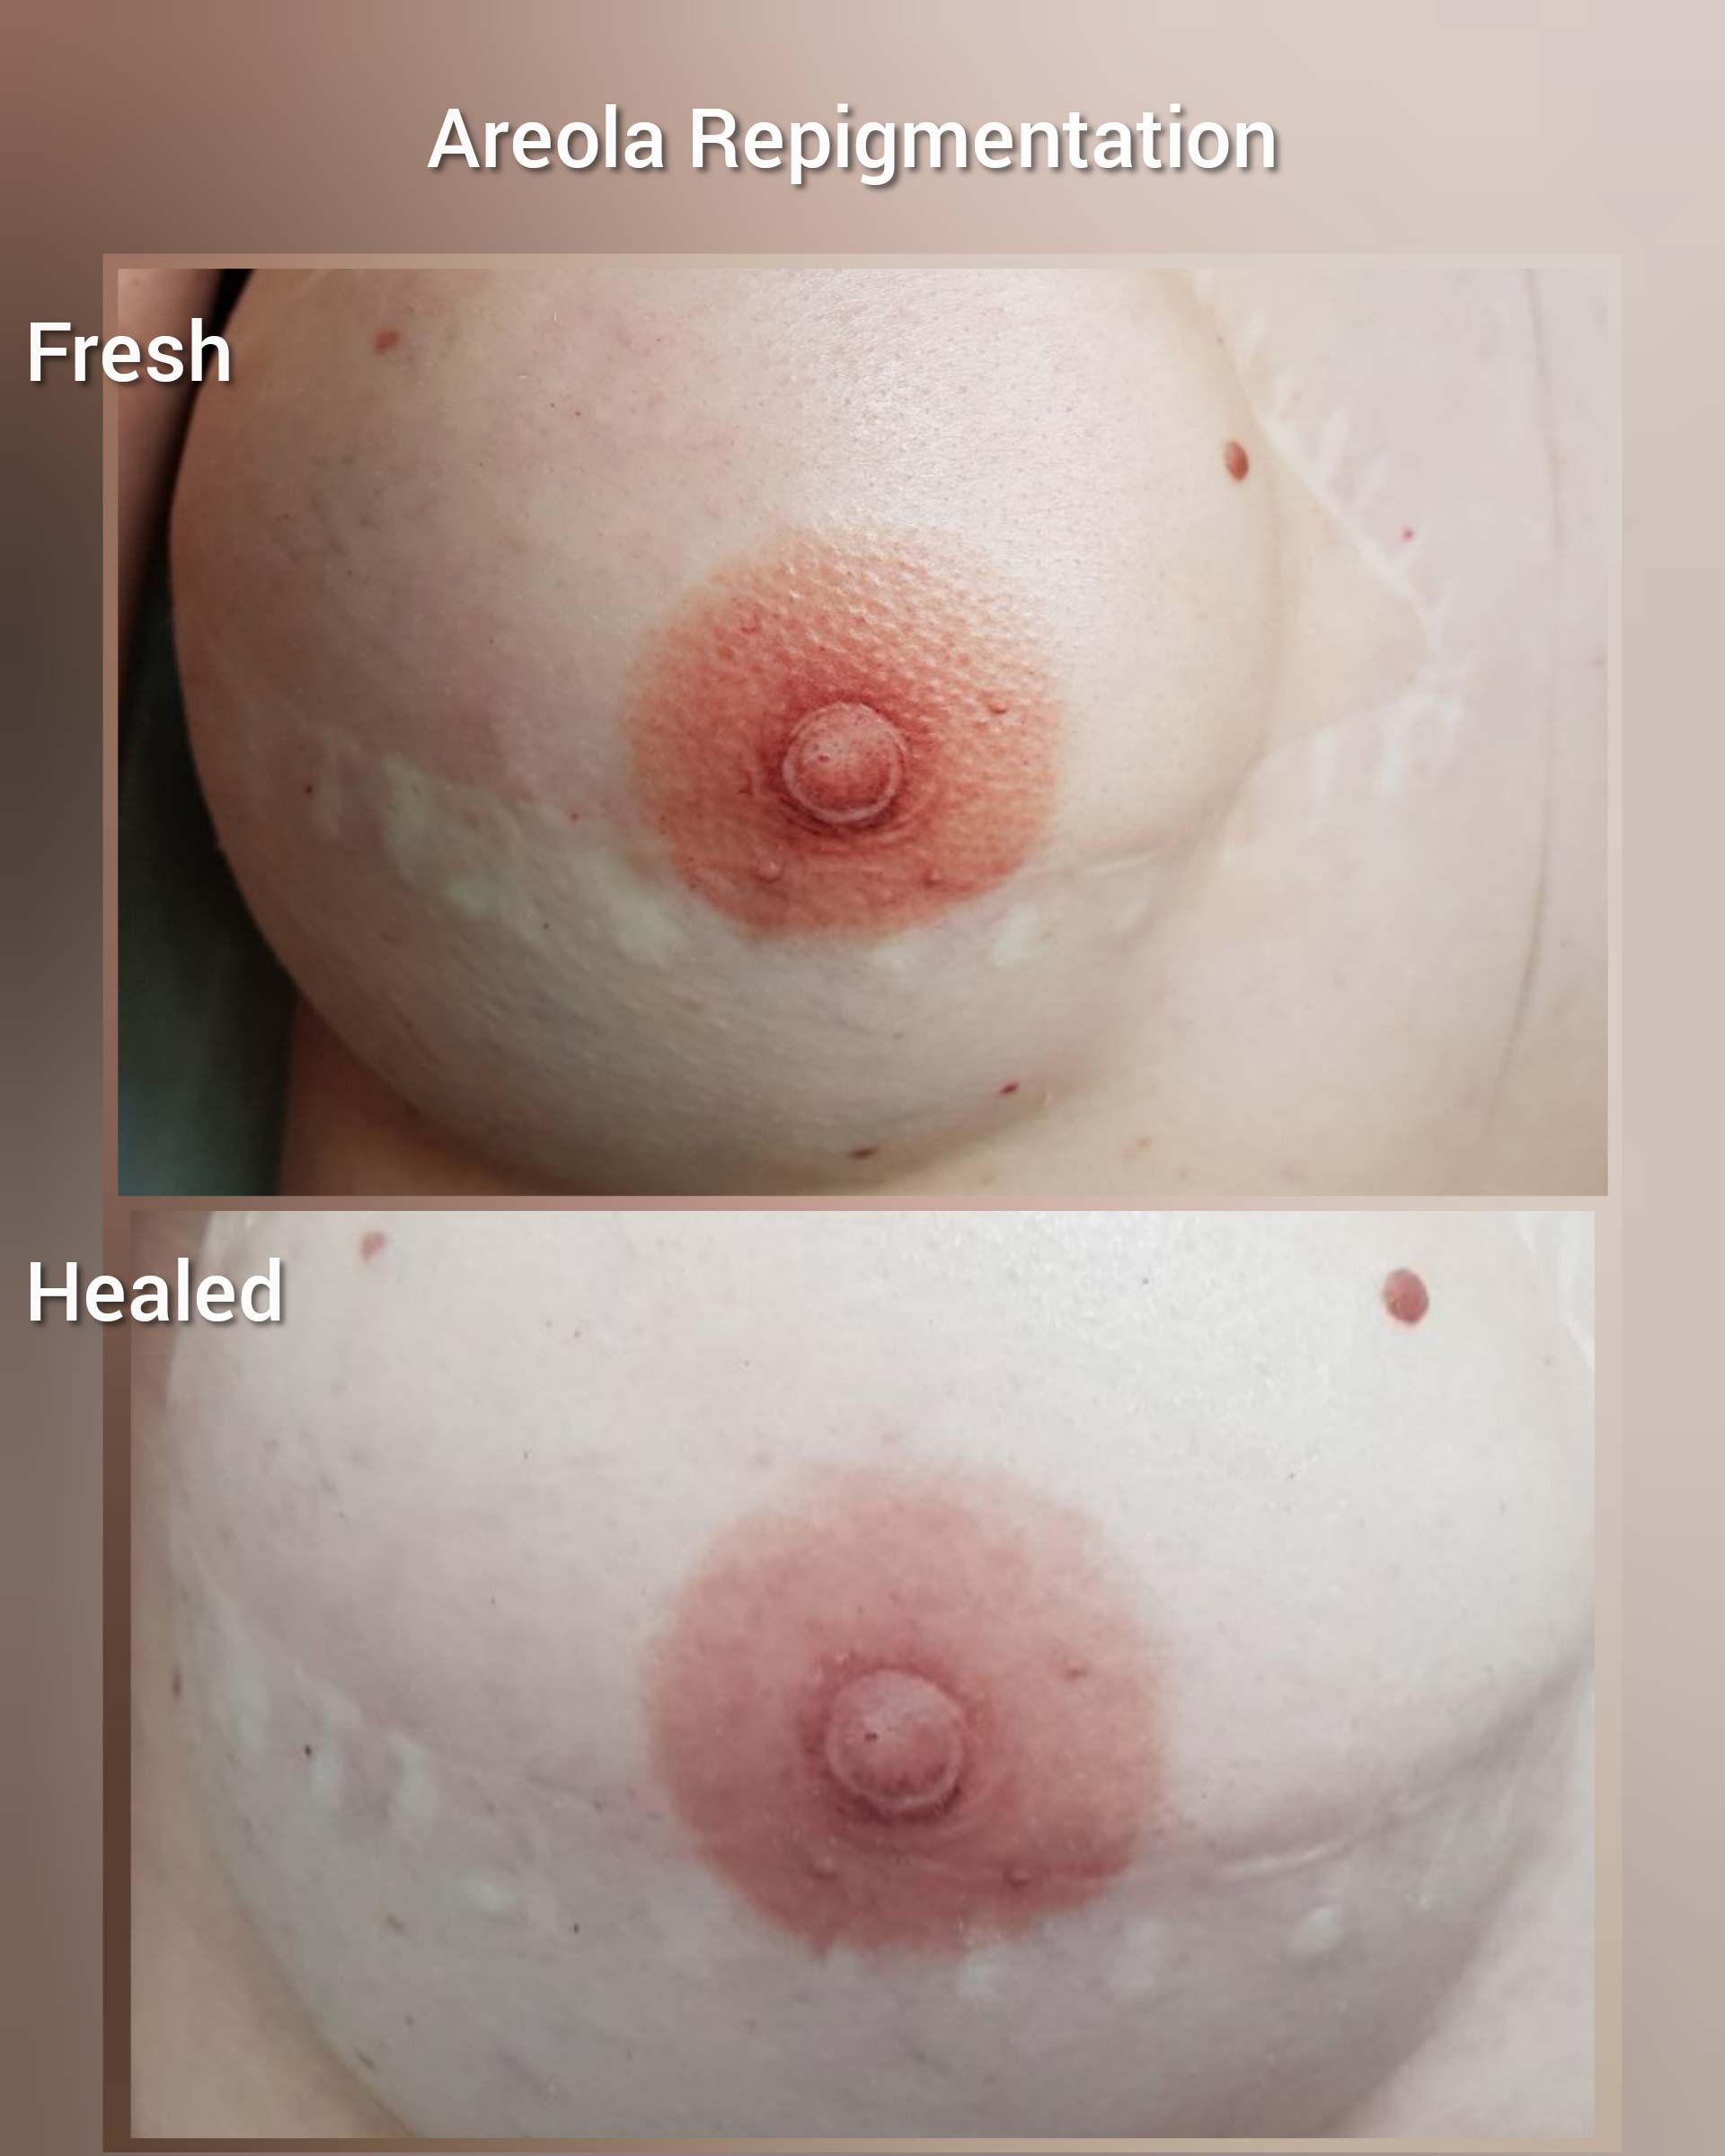 Areola Repigmentation. Cosmetic and Mediical Tattoo by Dasha. Permanent makeup and reconstructive tattoo, scalp micro-pigmentation in Christchurch, New Zealand